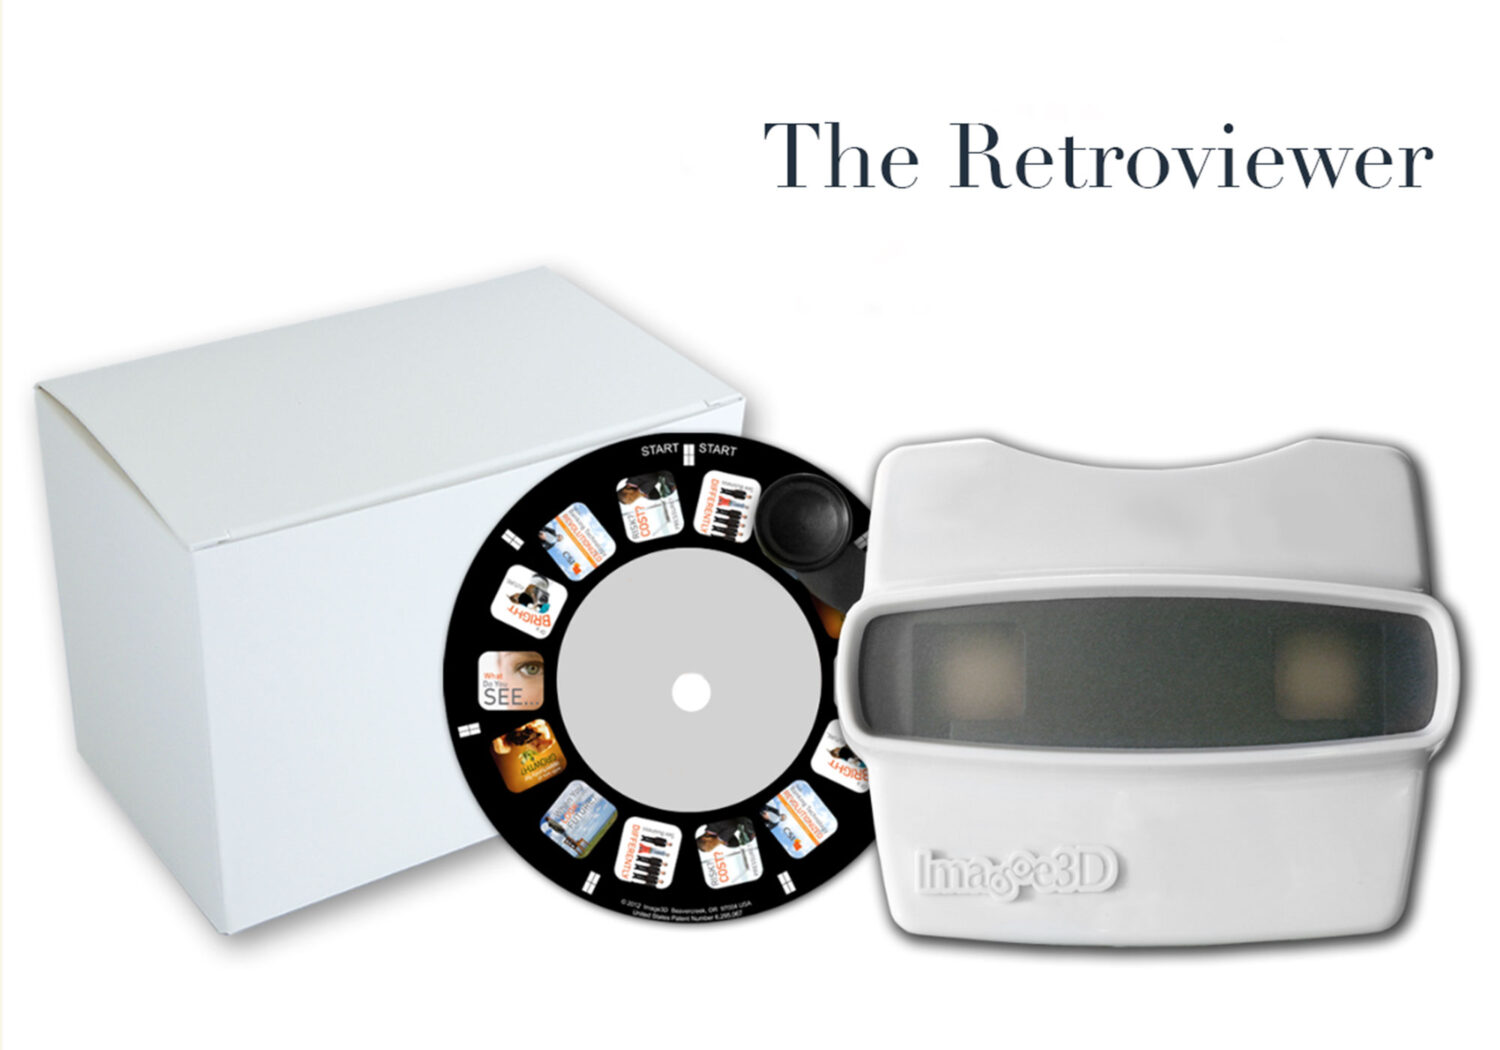 The REtroviewer is our choice for a top photo gift due to its price point and uniqueness.